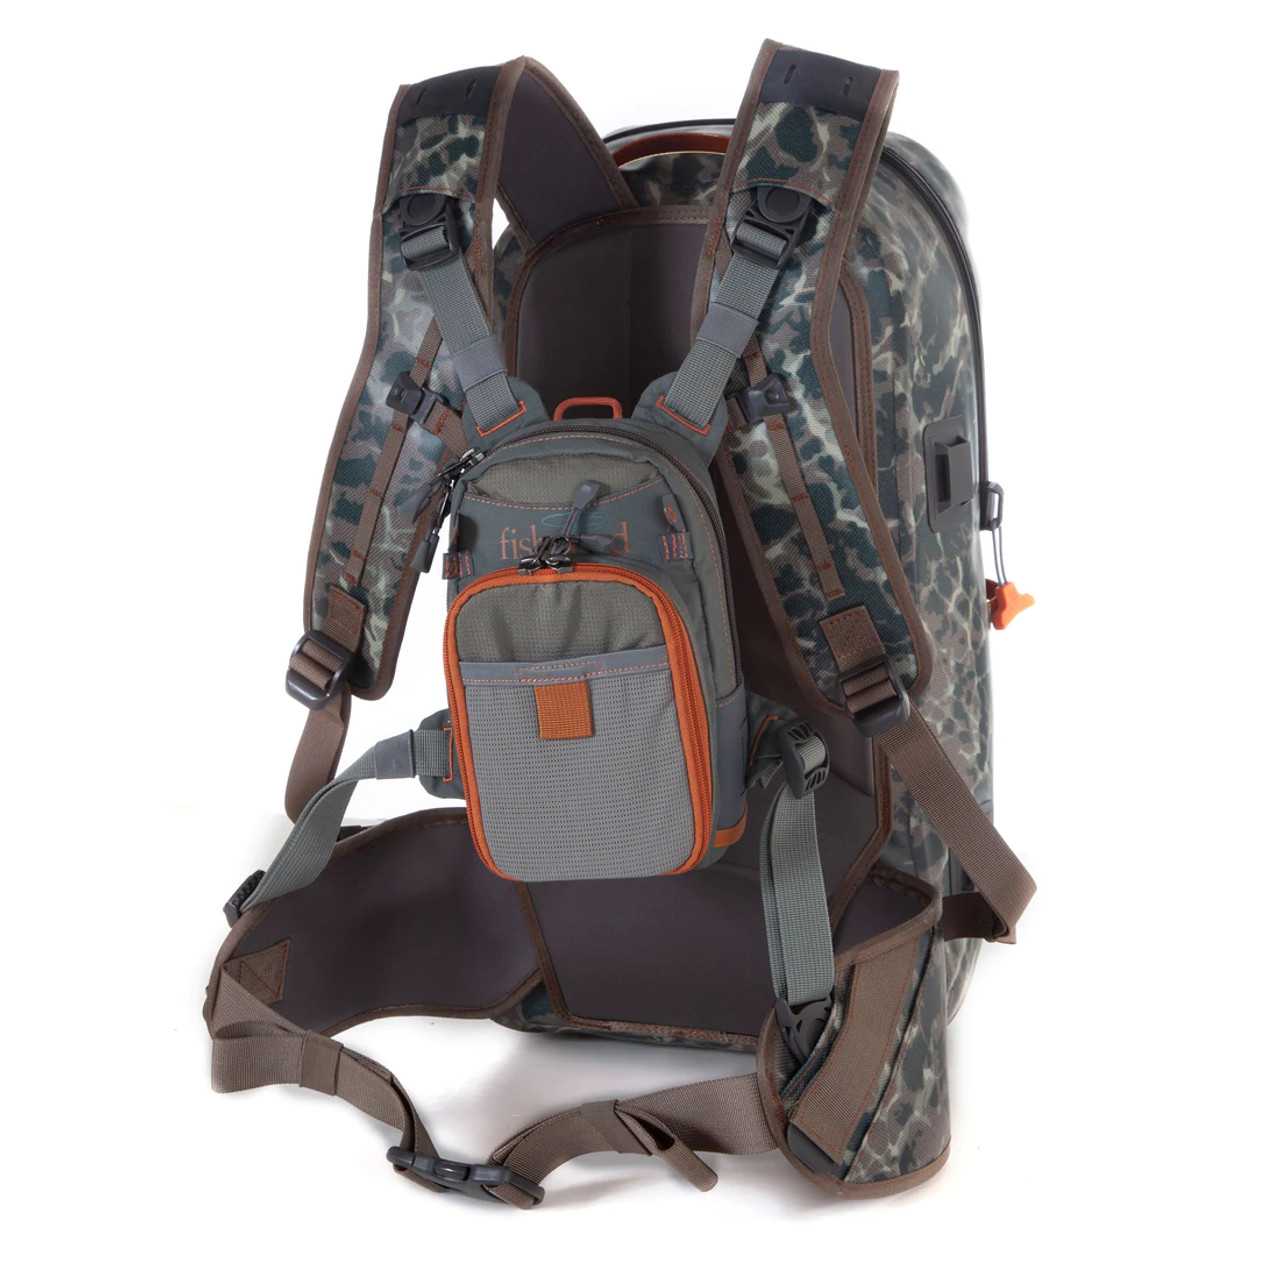  Fly Fishing Backpack